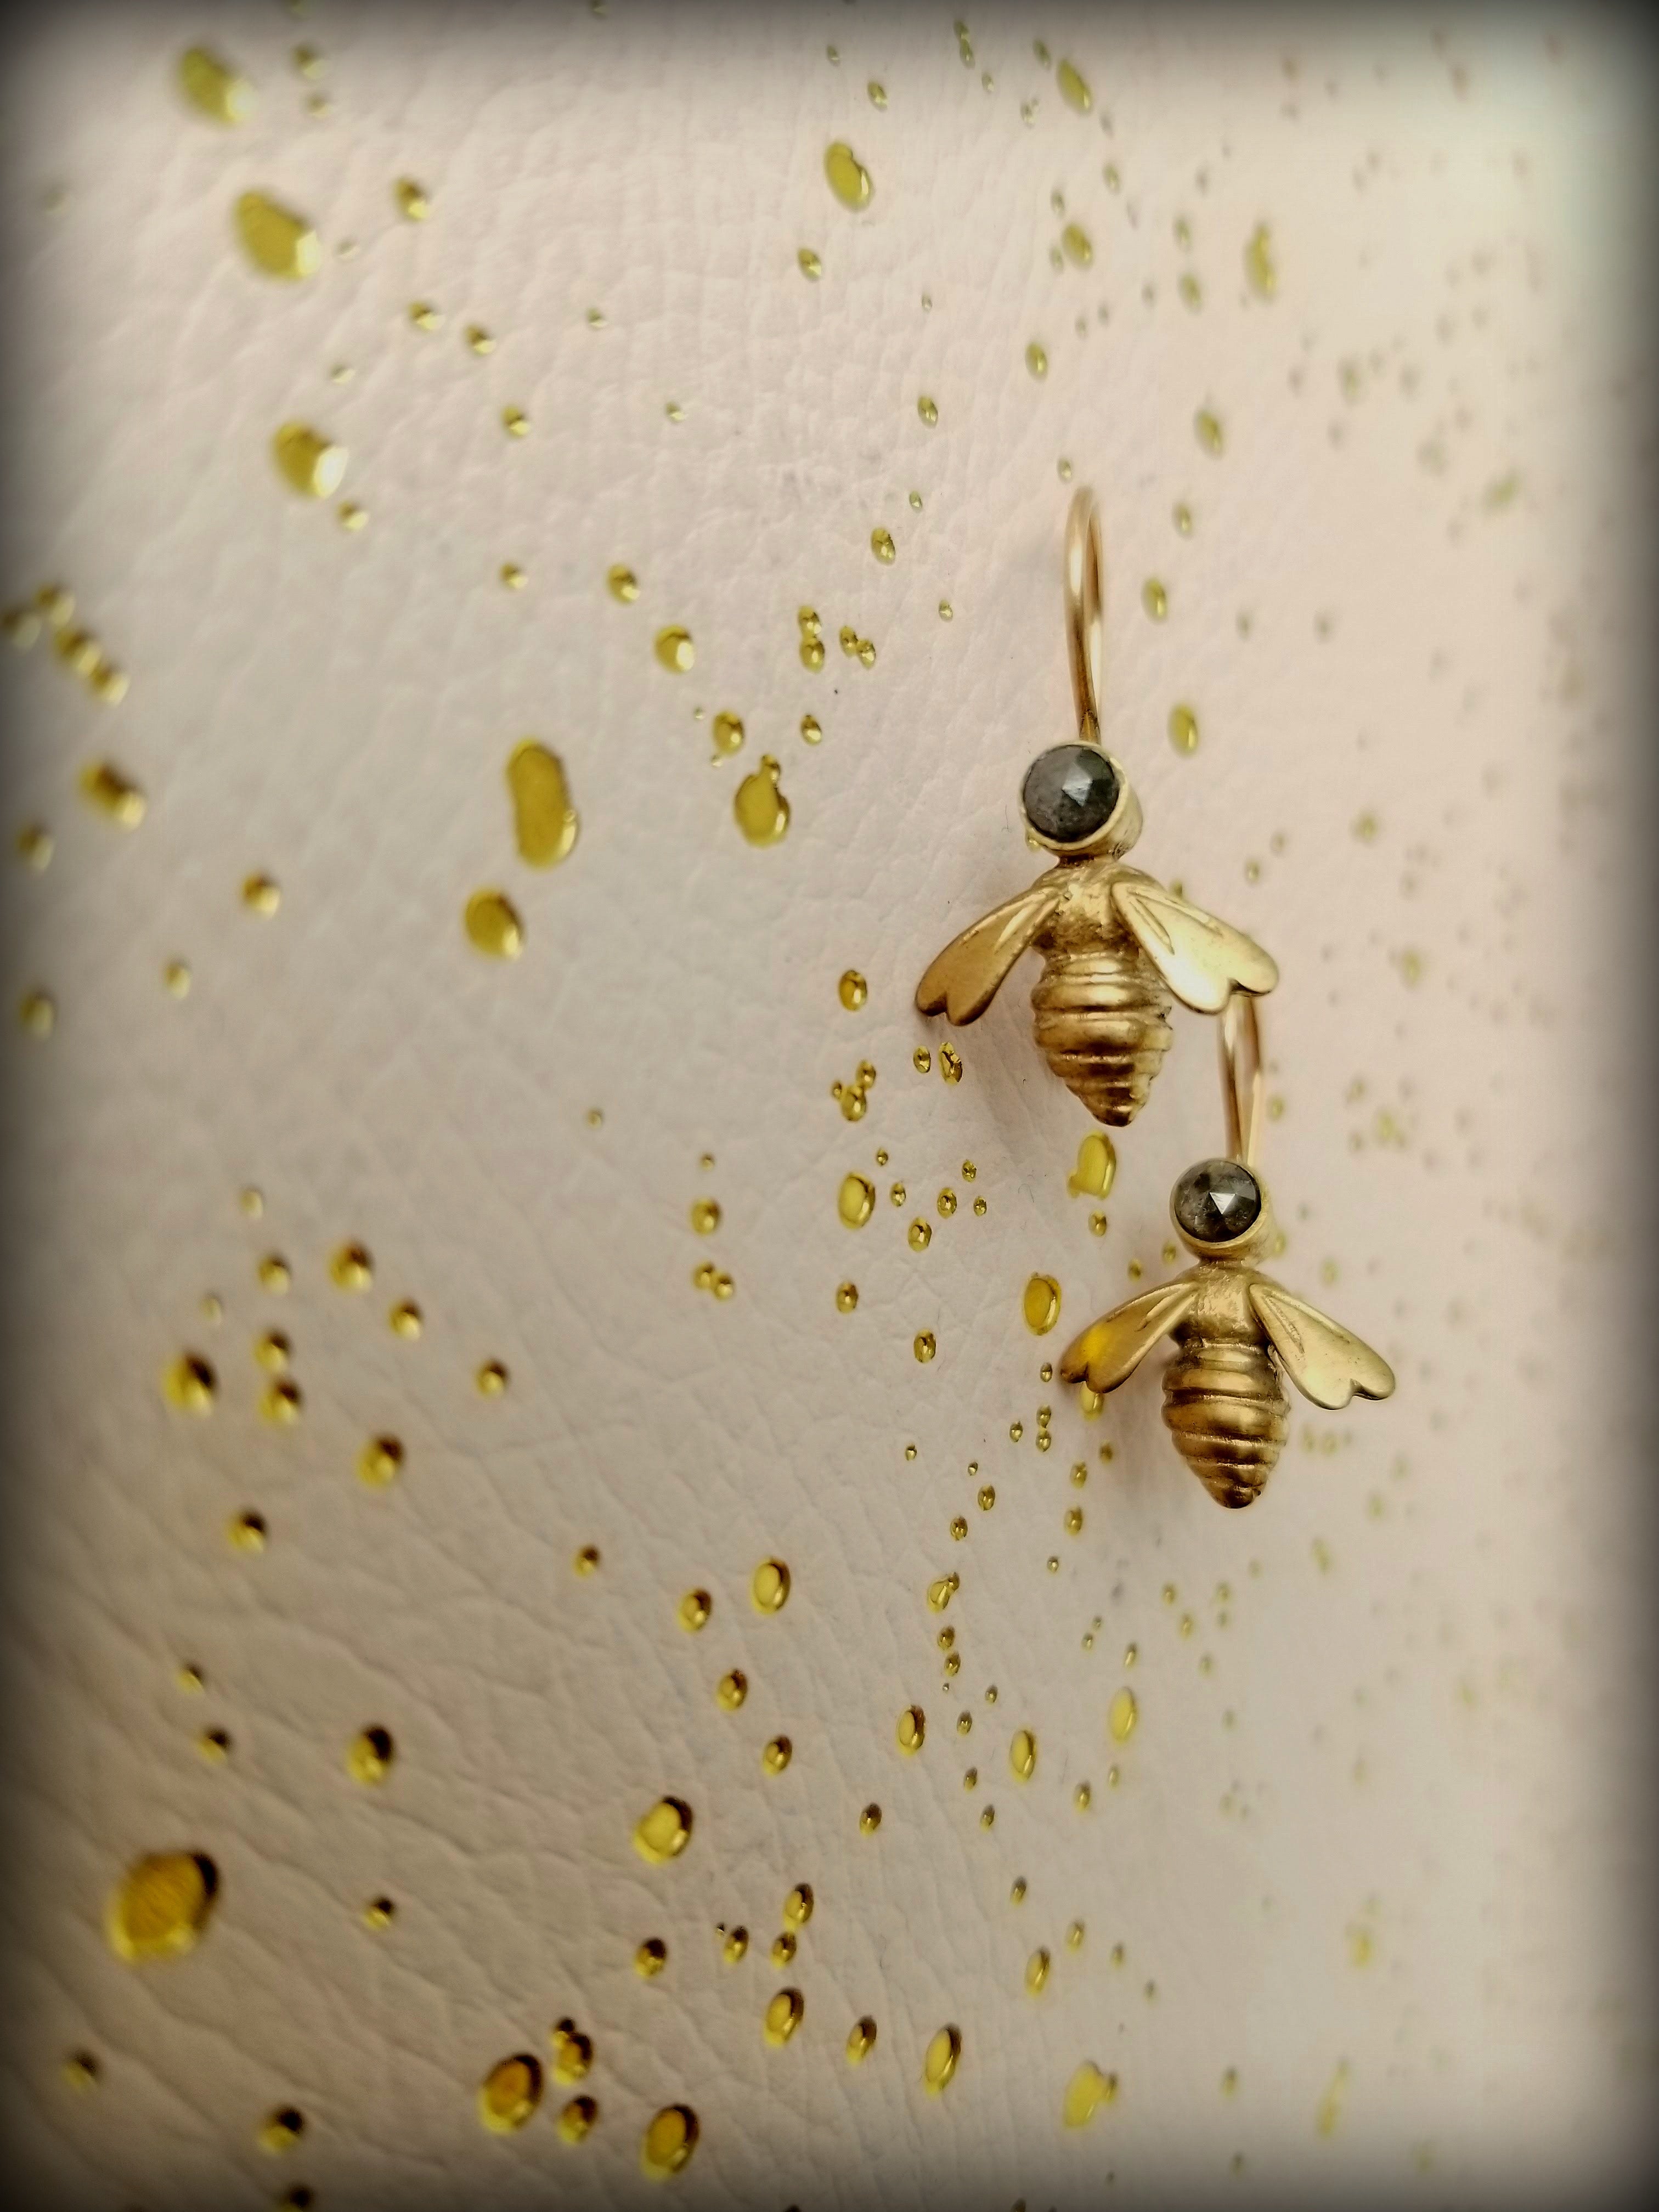 14k Gold Petite Queen Bee Earrings set with Salt and Pepper Diamonds